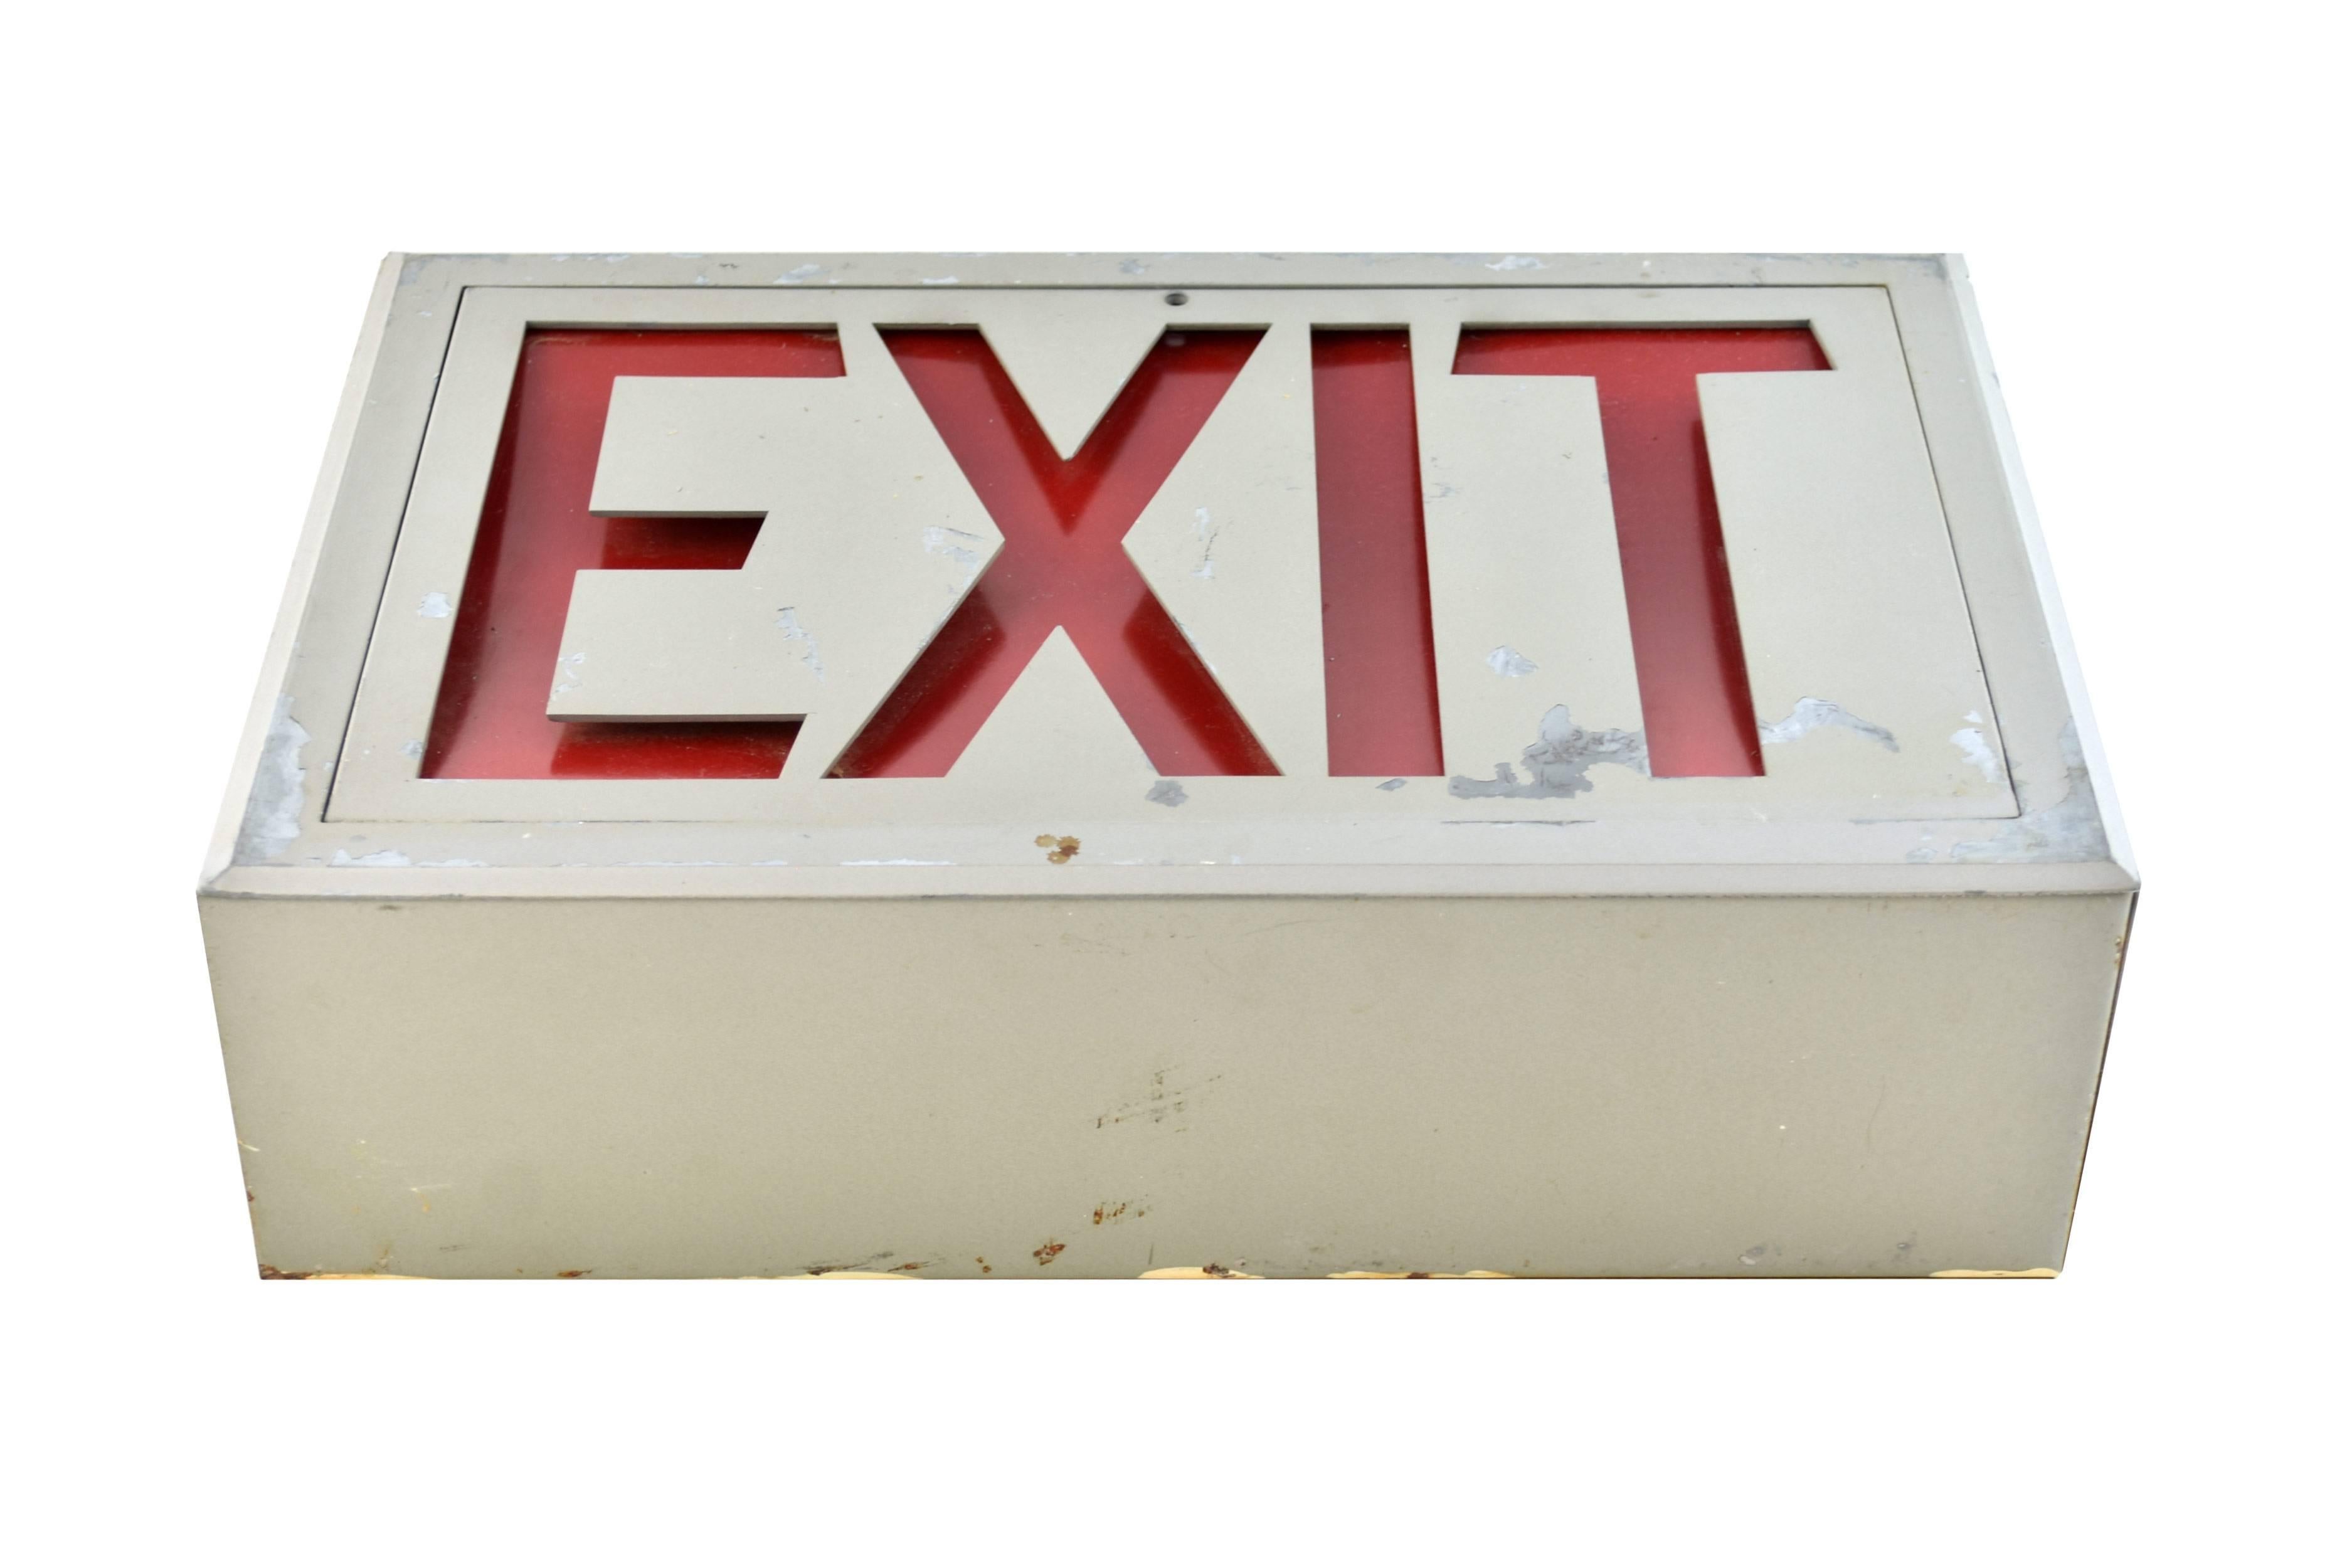 Steel exit signs with two variations. One has rounded edges and the other has sharp edges. Both light up!

Please note which style you prefer when making your purchase,

circa 1940
Condition: Fair
Finish: Original
Country of origin: